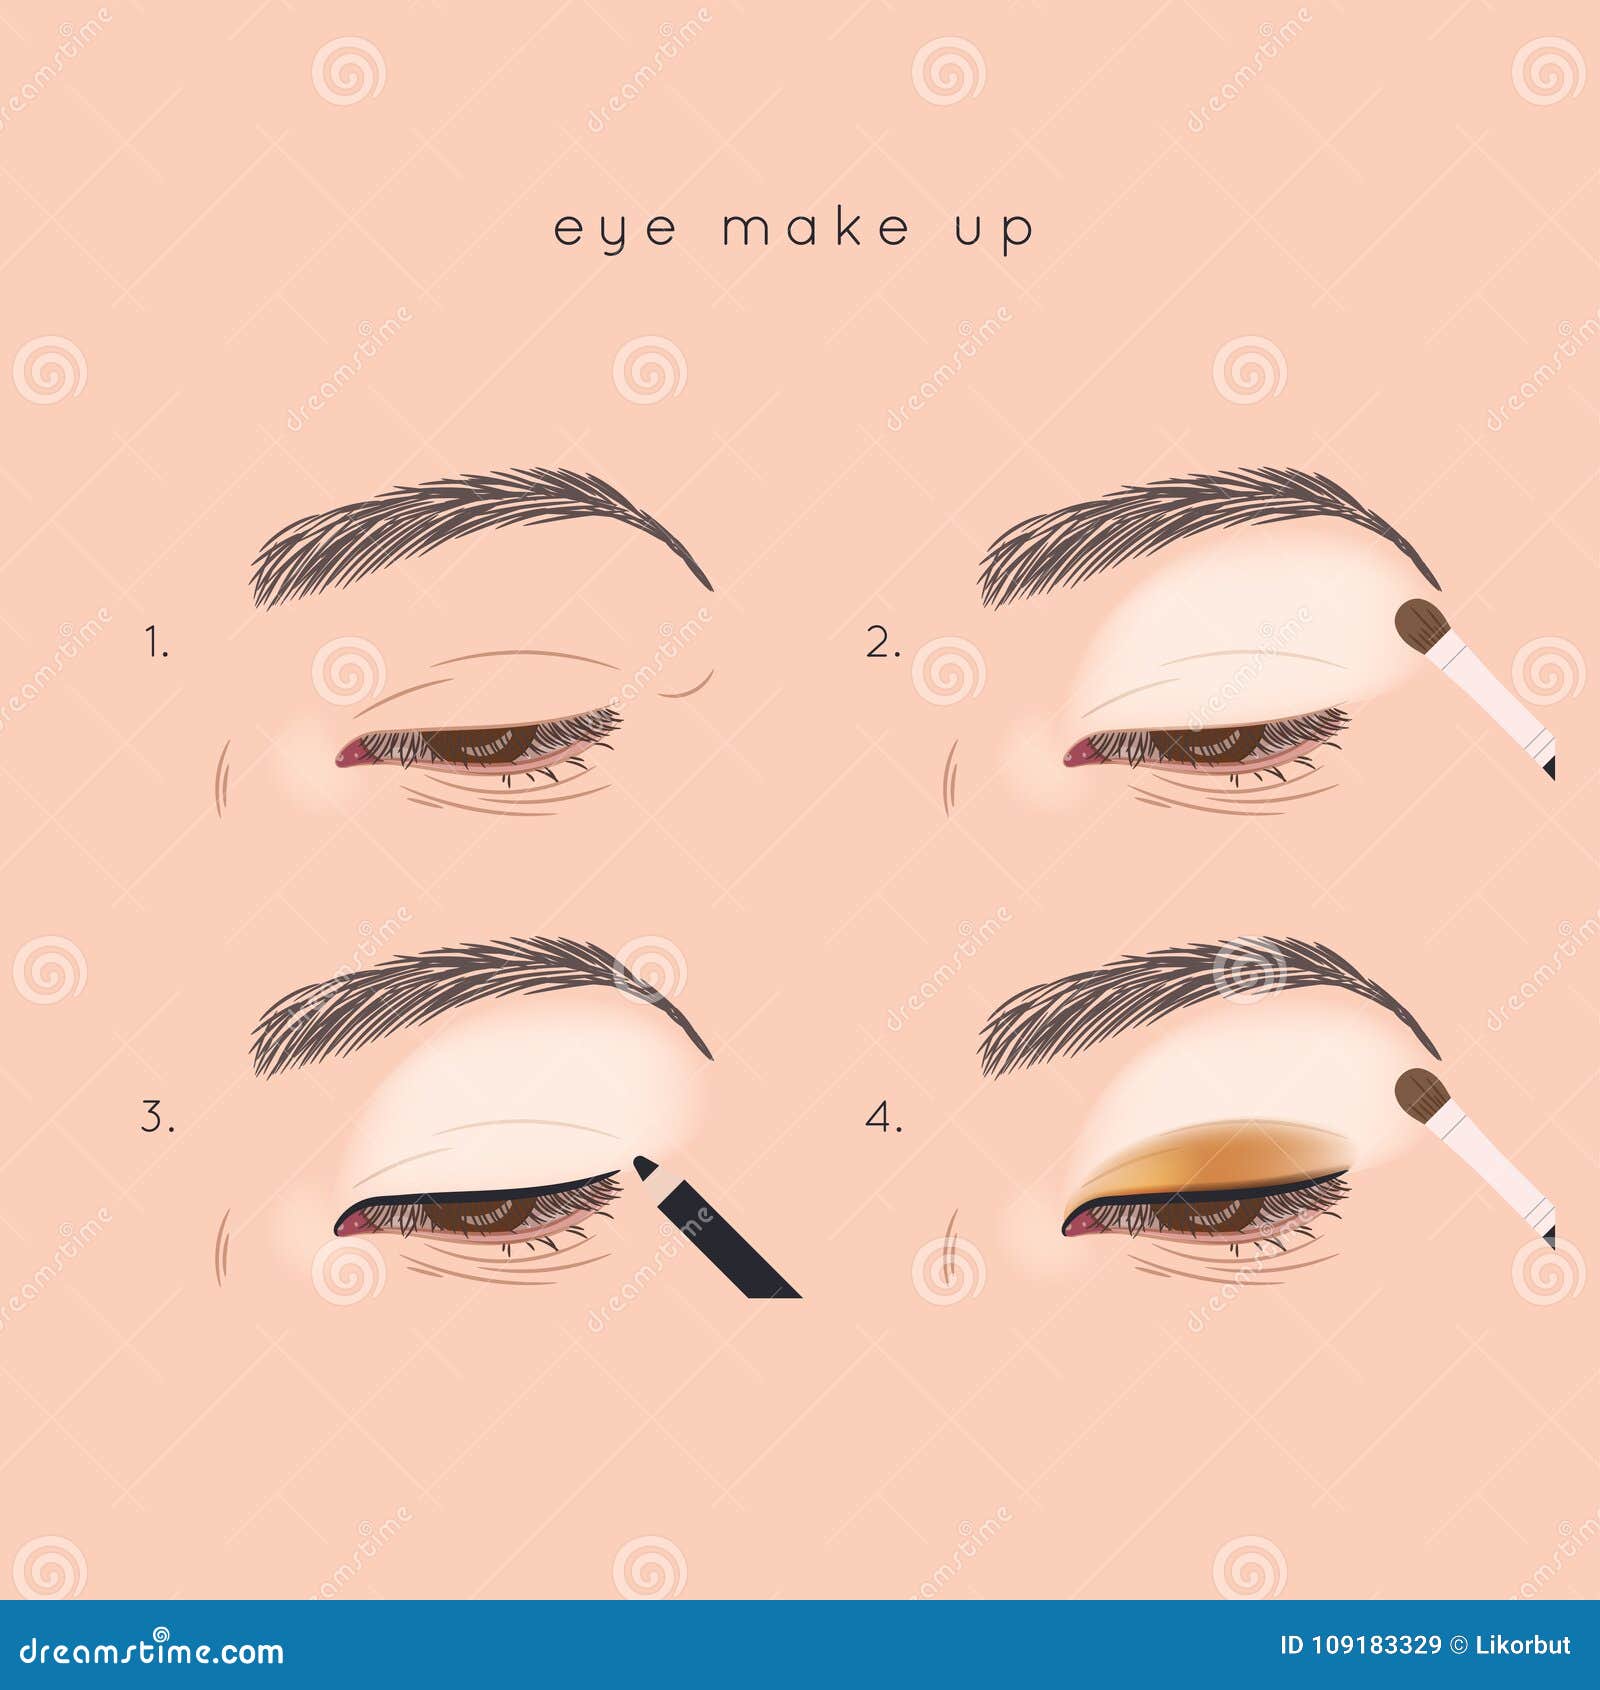 Eye Make Up Tutorial How To Apply Eyeshadow Stock Vector Illustration Of Makeup Template 109183329